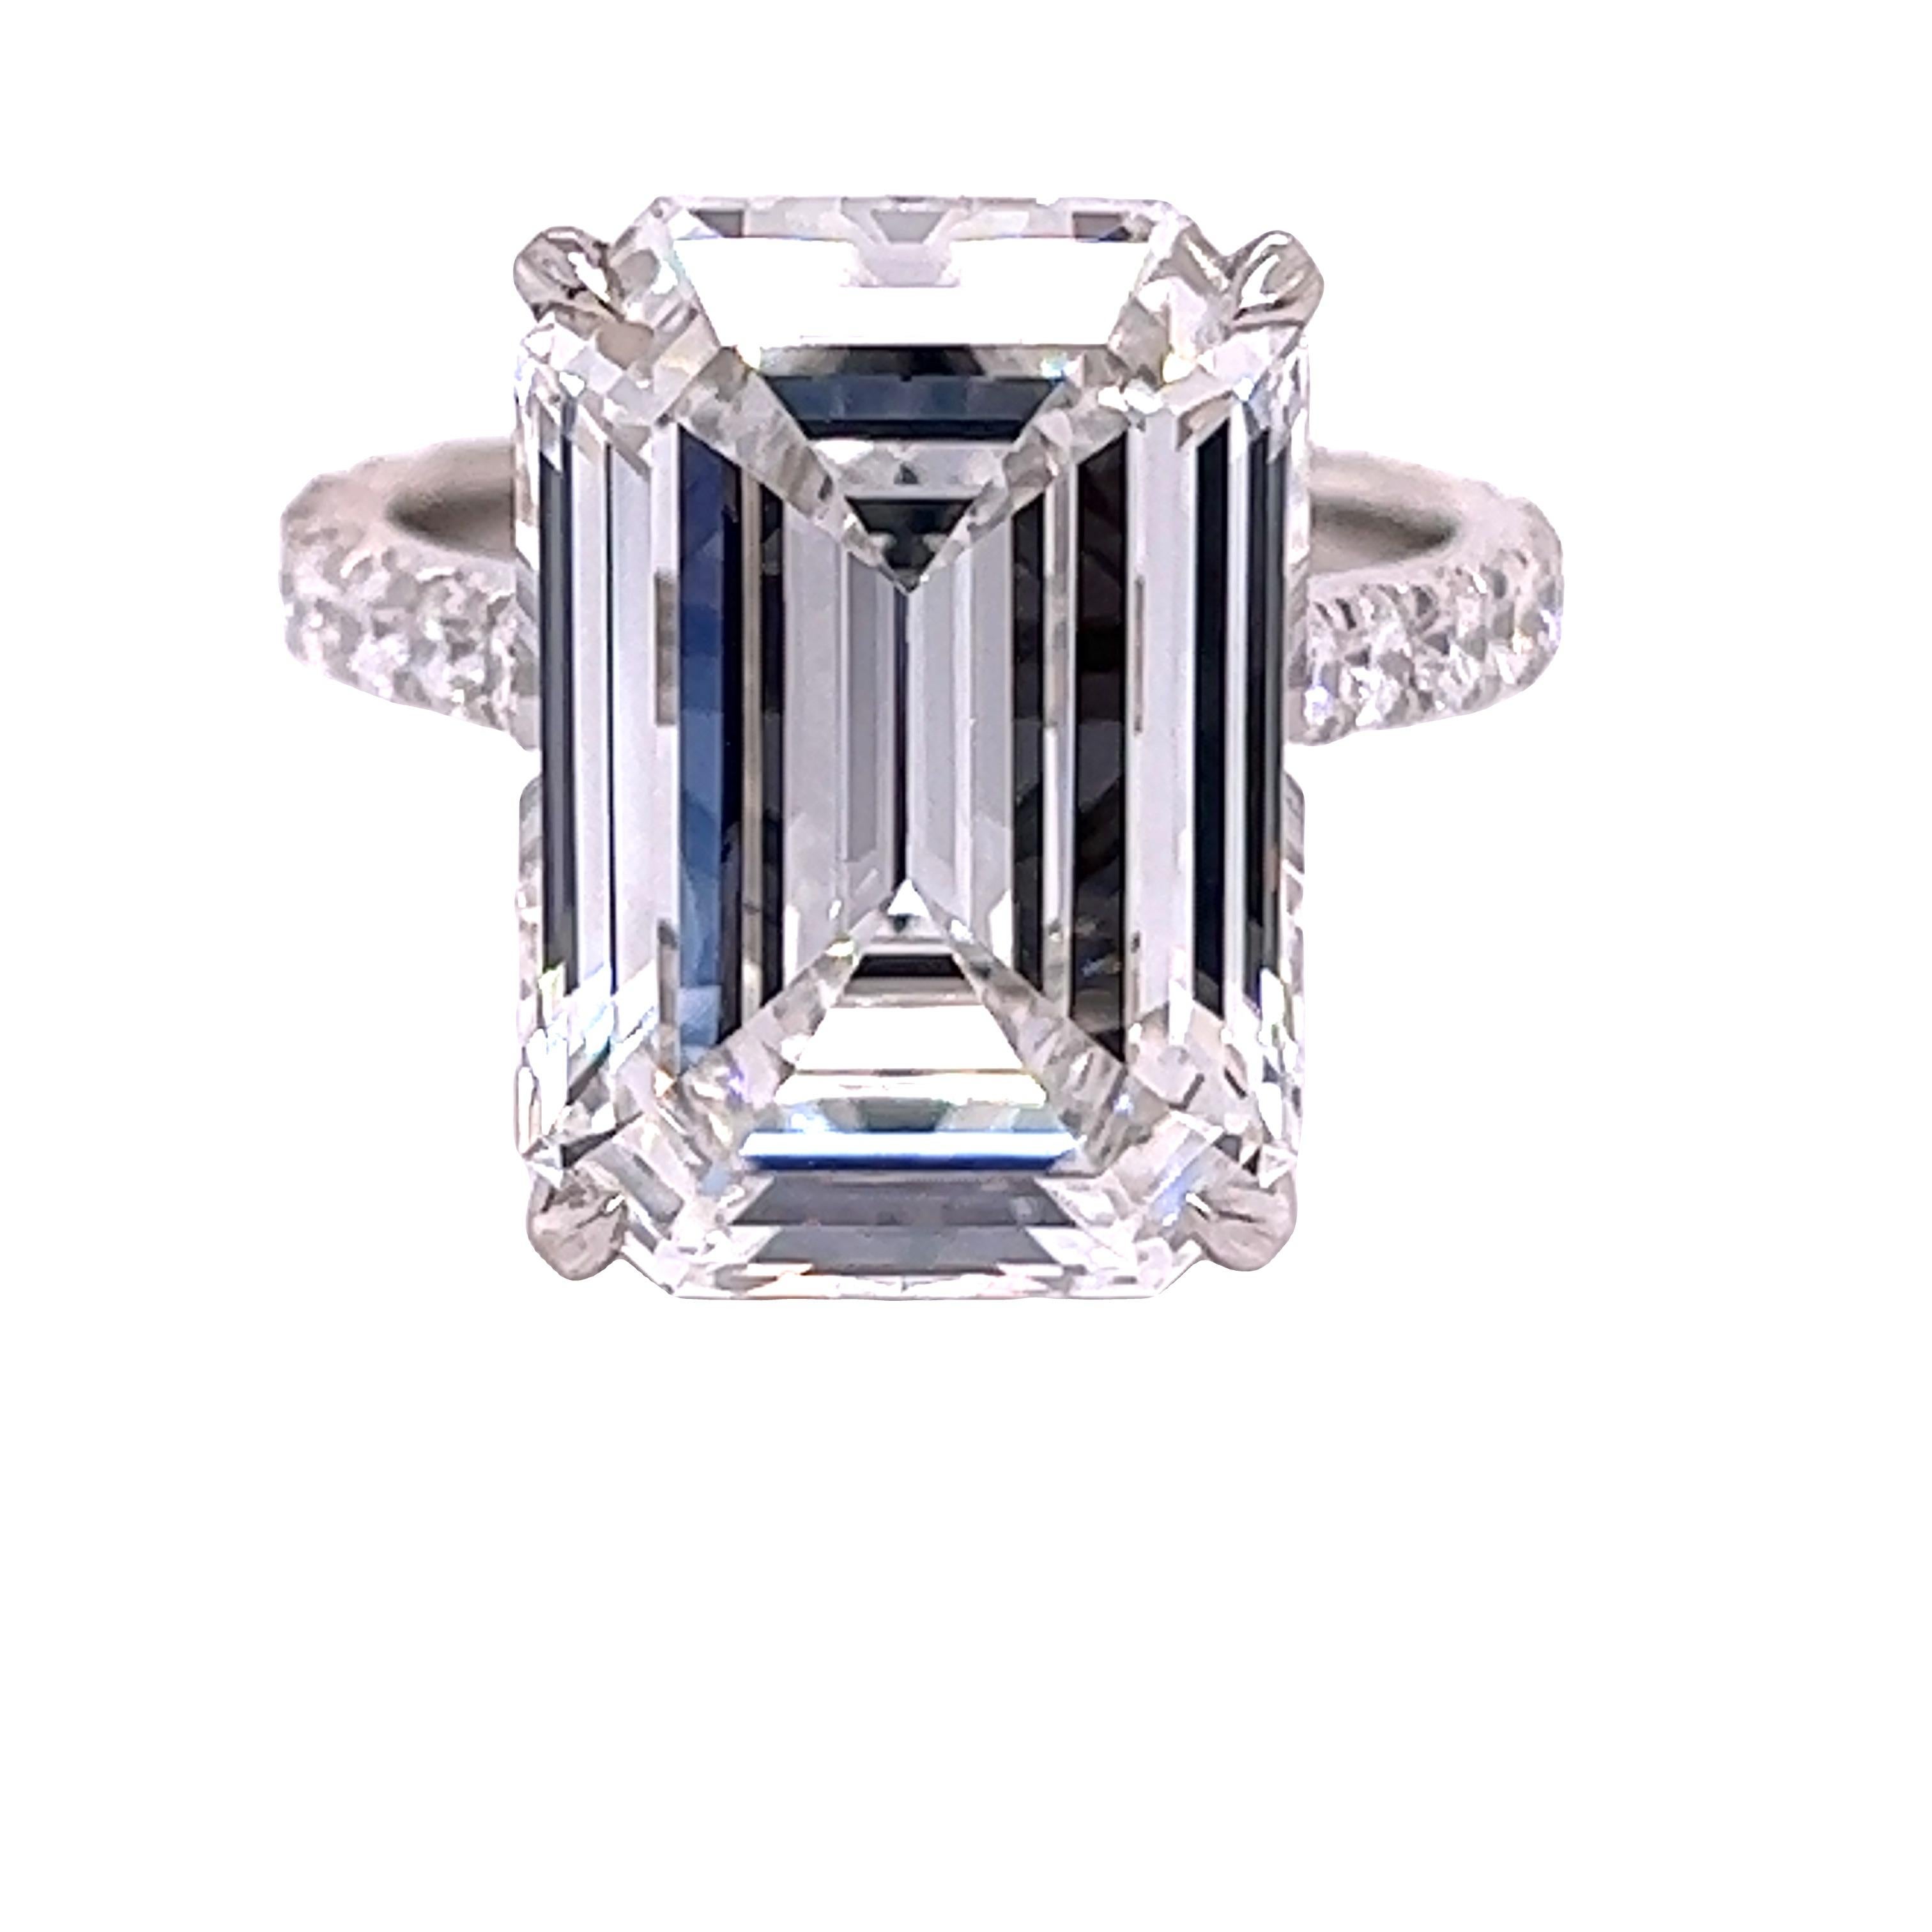 Rosenberg Diamonds & Co. 10.41 carat Emerald cut F color VVS2 clarity is accompanied by a GIA certificate. This breathtaking Emerald is full of brilliance and it is set in a handmade platinum setting and continues its elegance with a row of micro